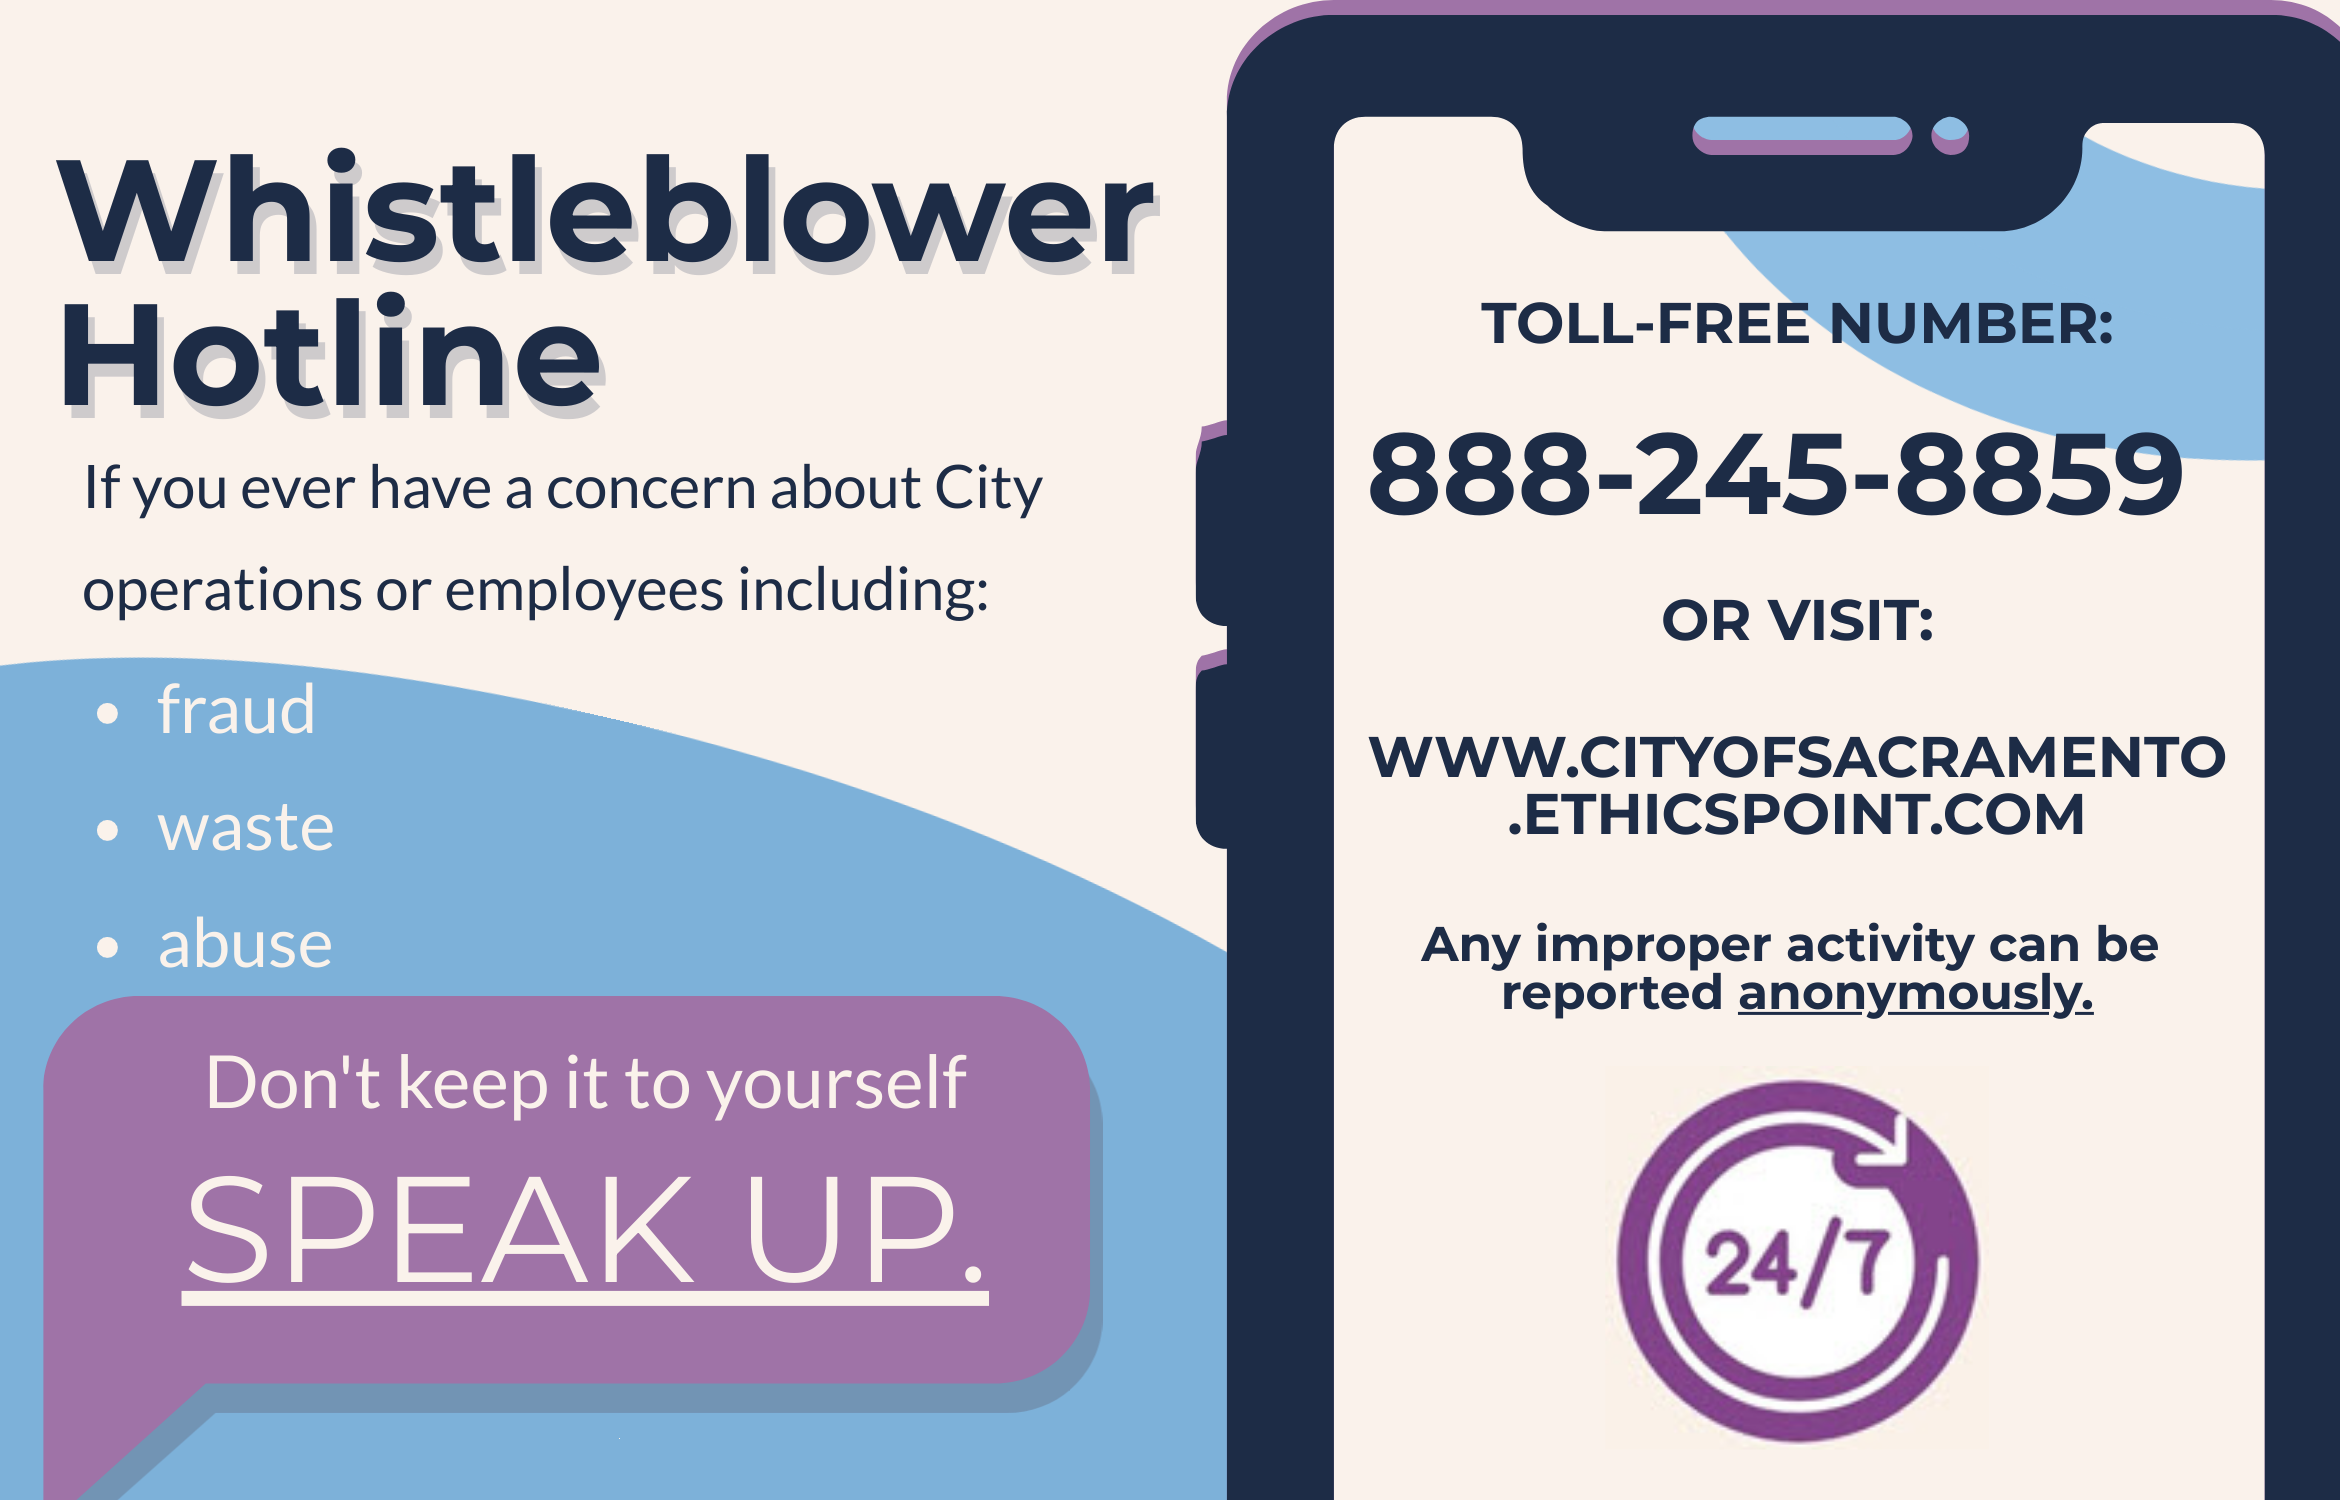 Whistleblower Hotline advertisement displaying toll free number 888-245-8859, web address www.cityofsacramento.ethicspoint.com, identifying that any improper activity can be reported anonymously 24/7, and that if you ever have a concern about City operations or employees including fraud, waste, or abuse don't keep it to yourself, speak up.